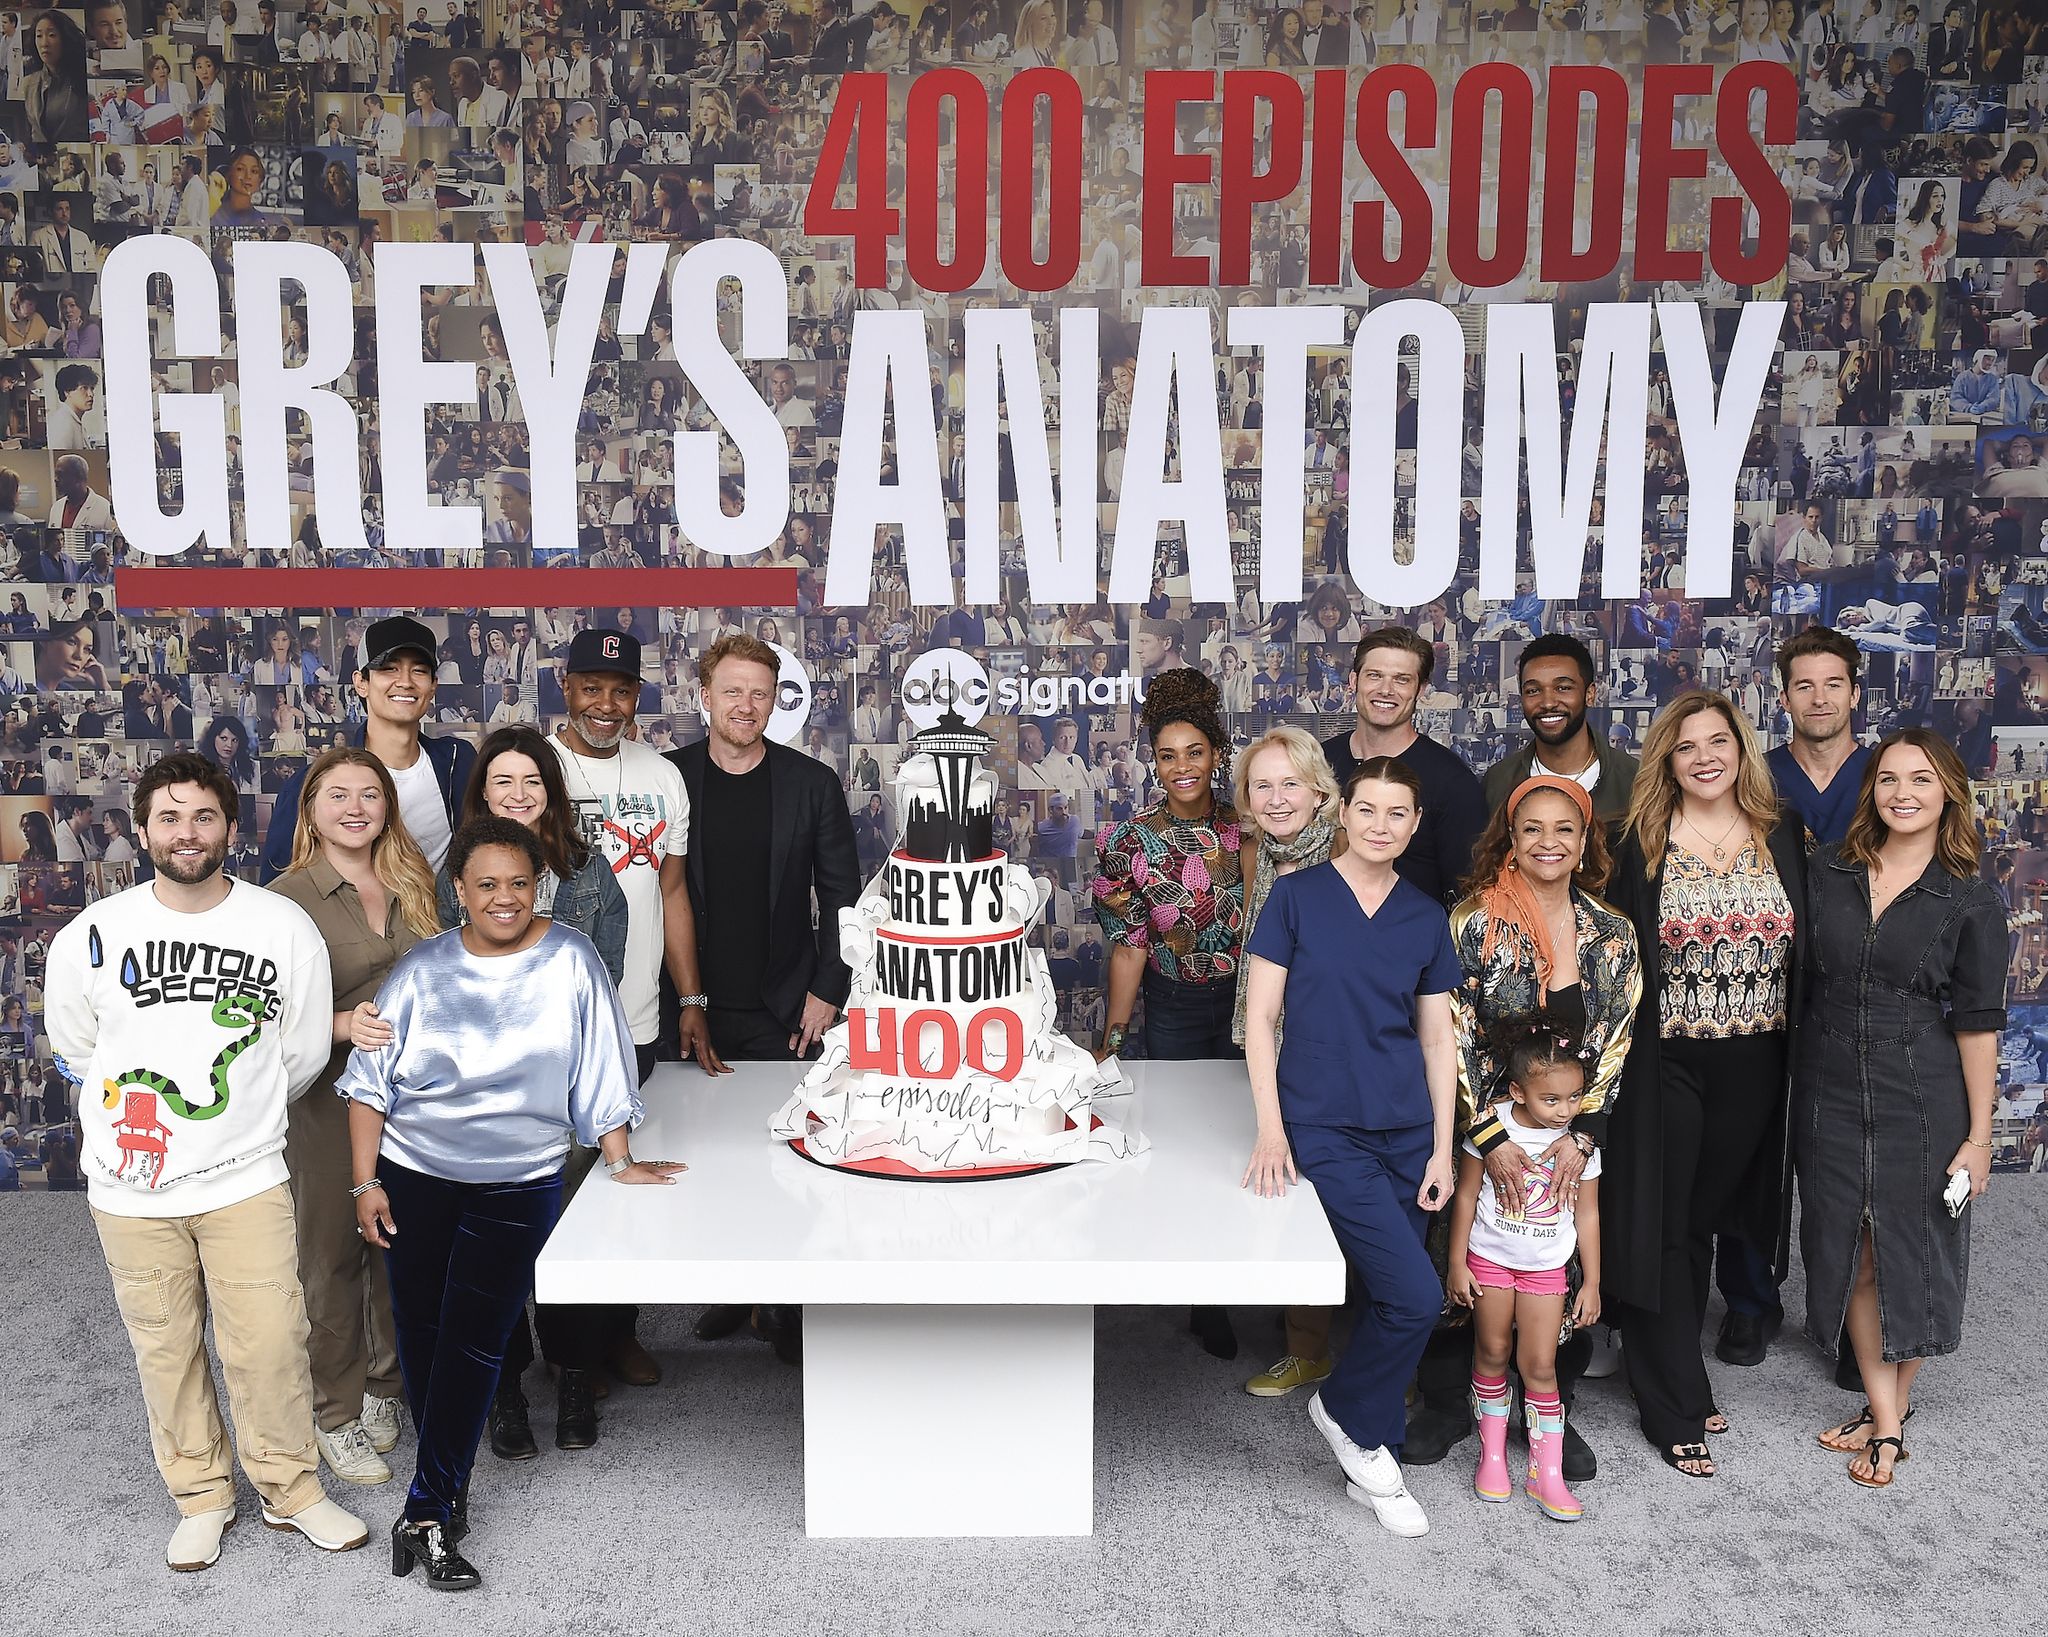 grey’s anatomy   abc and abc signature came together with the cast, crew and creative team of “grey’s anatomy” to celebrate the 400th episode milestone of tv’s longest running primetime medical drama with a cake cutting ceremony on the set in los angeles on monday, may 2, 2022 during the celebration, the network and studio surprised the cast and crew with a stage dedication, permanently commemorating the show’s legacy at prospect studios as a reminder of the magic being made in that very spot “grey’s anatomy” returns to abc on thursday, may 5, and the 400th episode will air as the season finale on thursday, may 26 abcjake borelli, jaicy elliot, alex landi, chandra wilson, caterina scorsone, james pickens jr, kevin mckidd, kelly mccreary, kate burton, chris carmack, ellen pompeo, anthony hill, debbie allen executive producer, krista vernoff showrunner and executive producer, scott speedman, camilla luddington